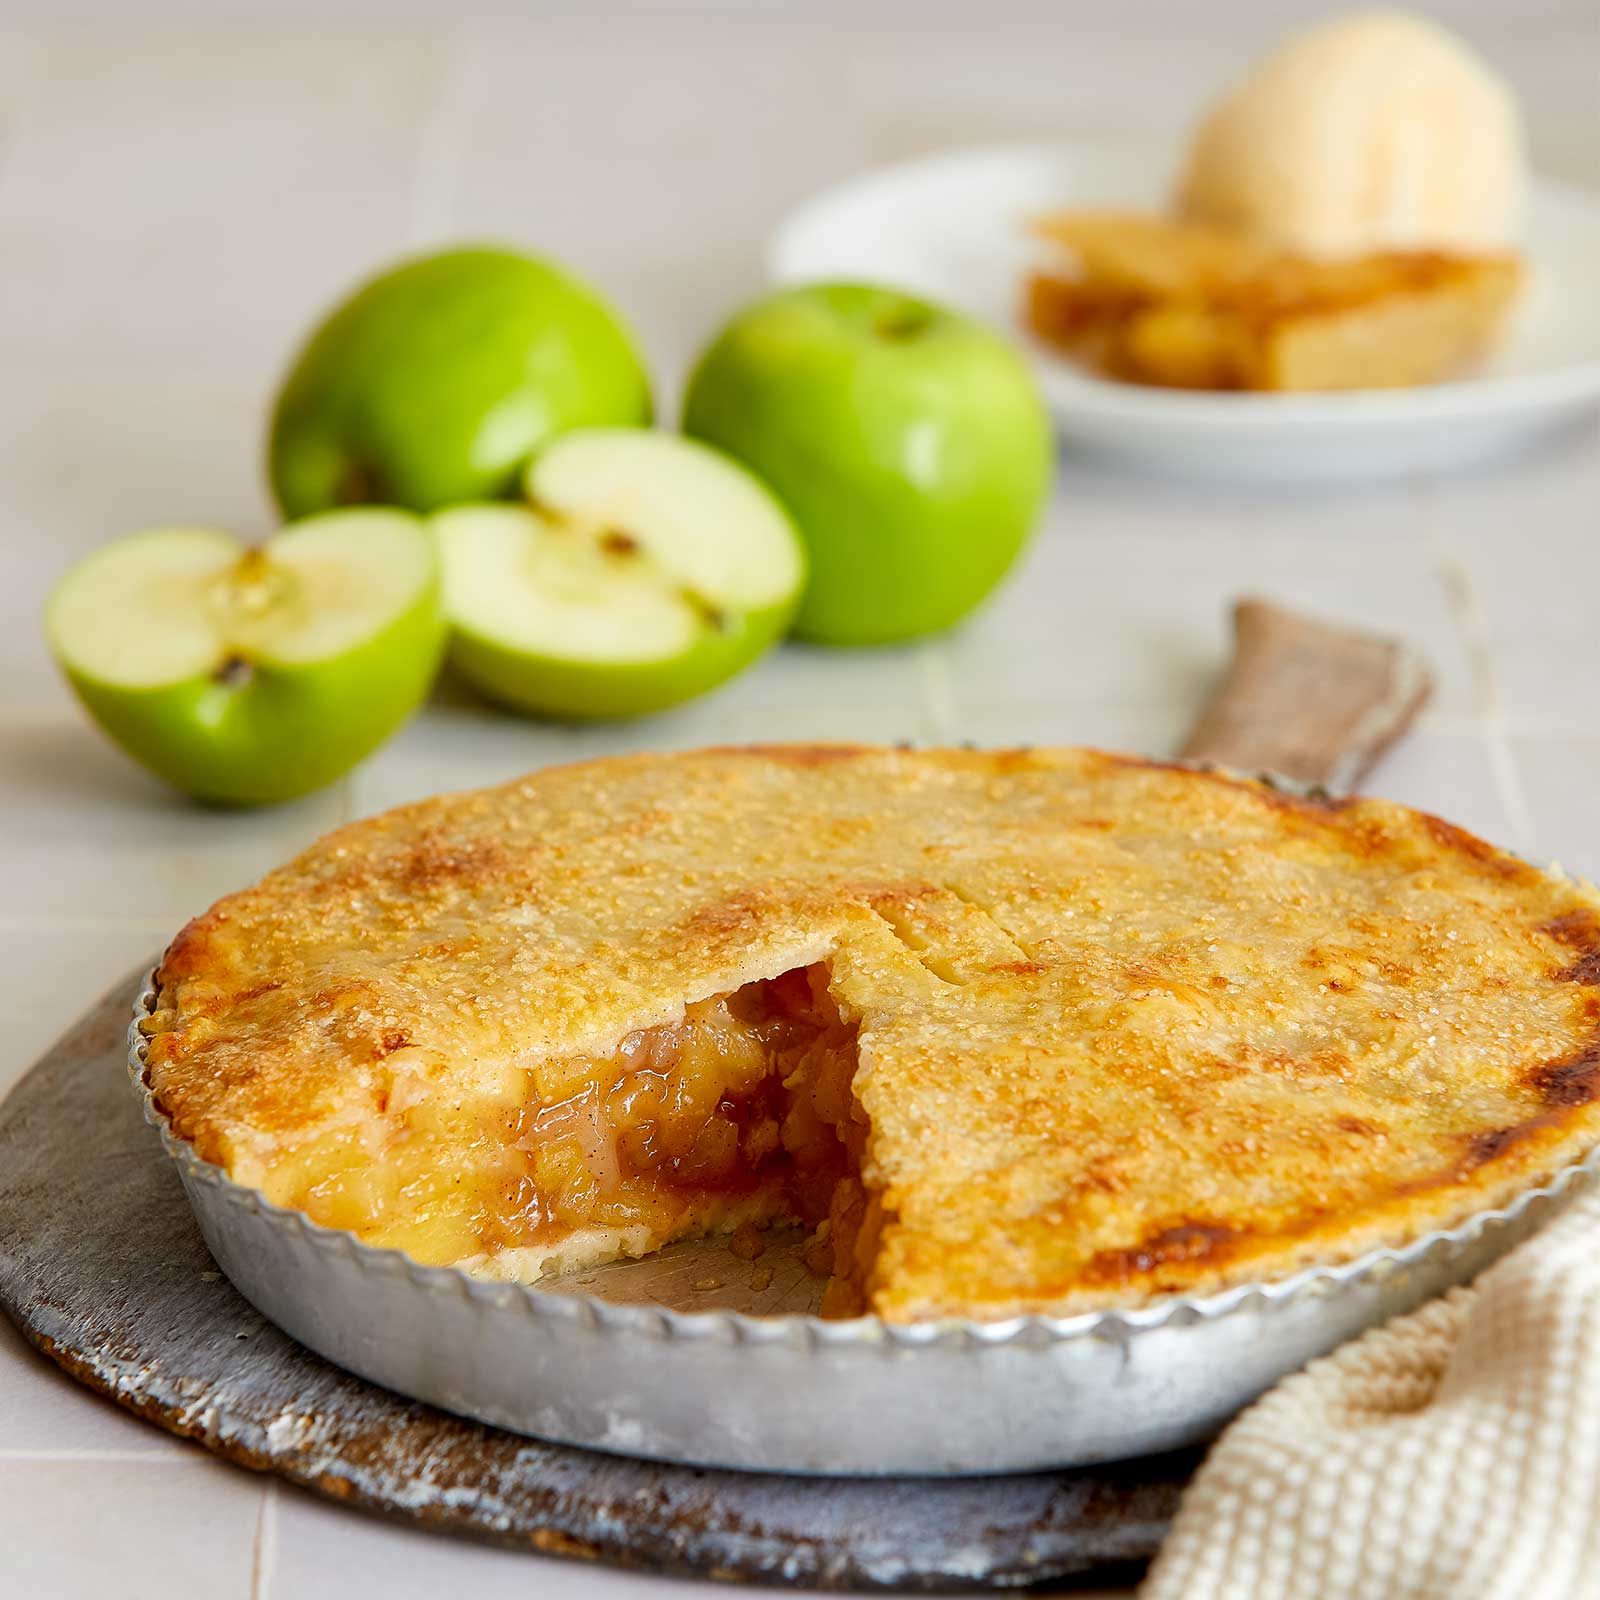 A silver pie dish rests on a wooden tray. A gluten-free apple cider pie has been baked in the pie dish. A slice has been removed and is plated at the back with a scoop of ice-cream. Some Granny Smith Apple rest between the pie and served slice.